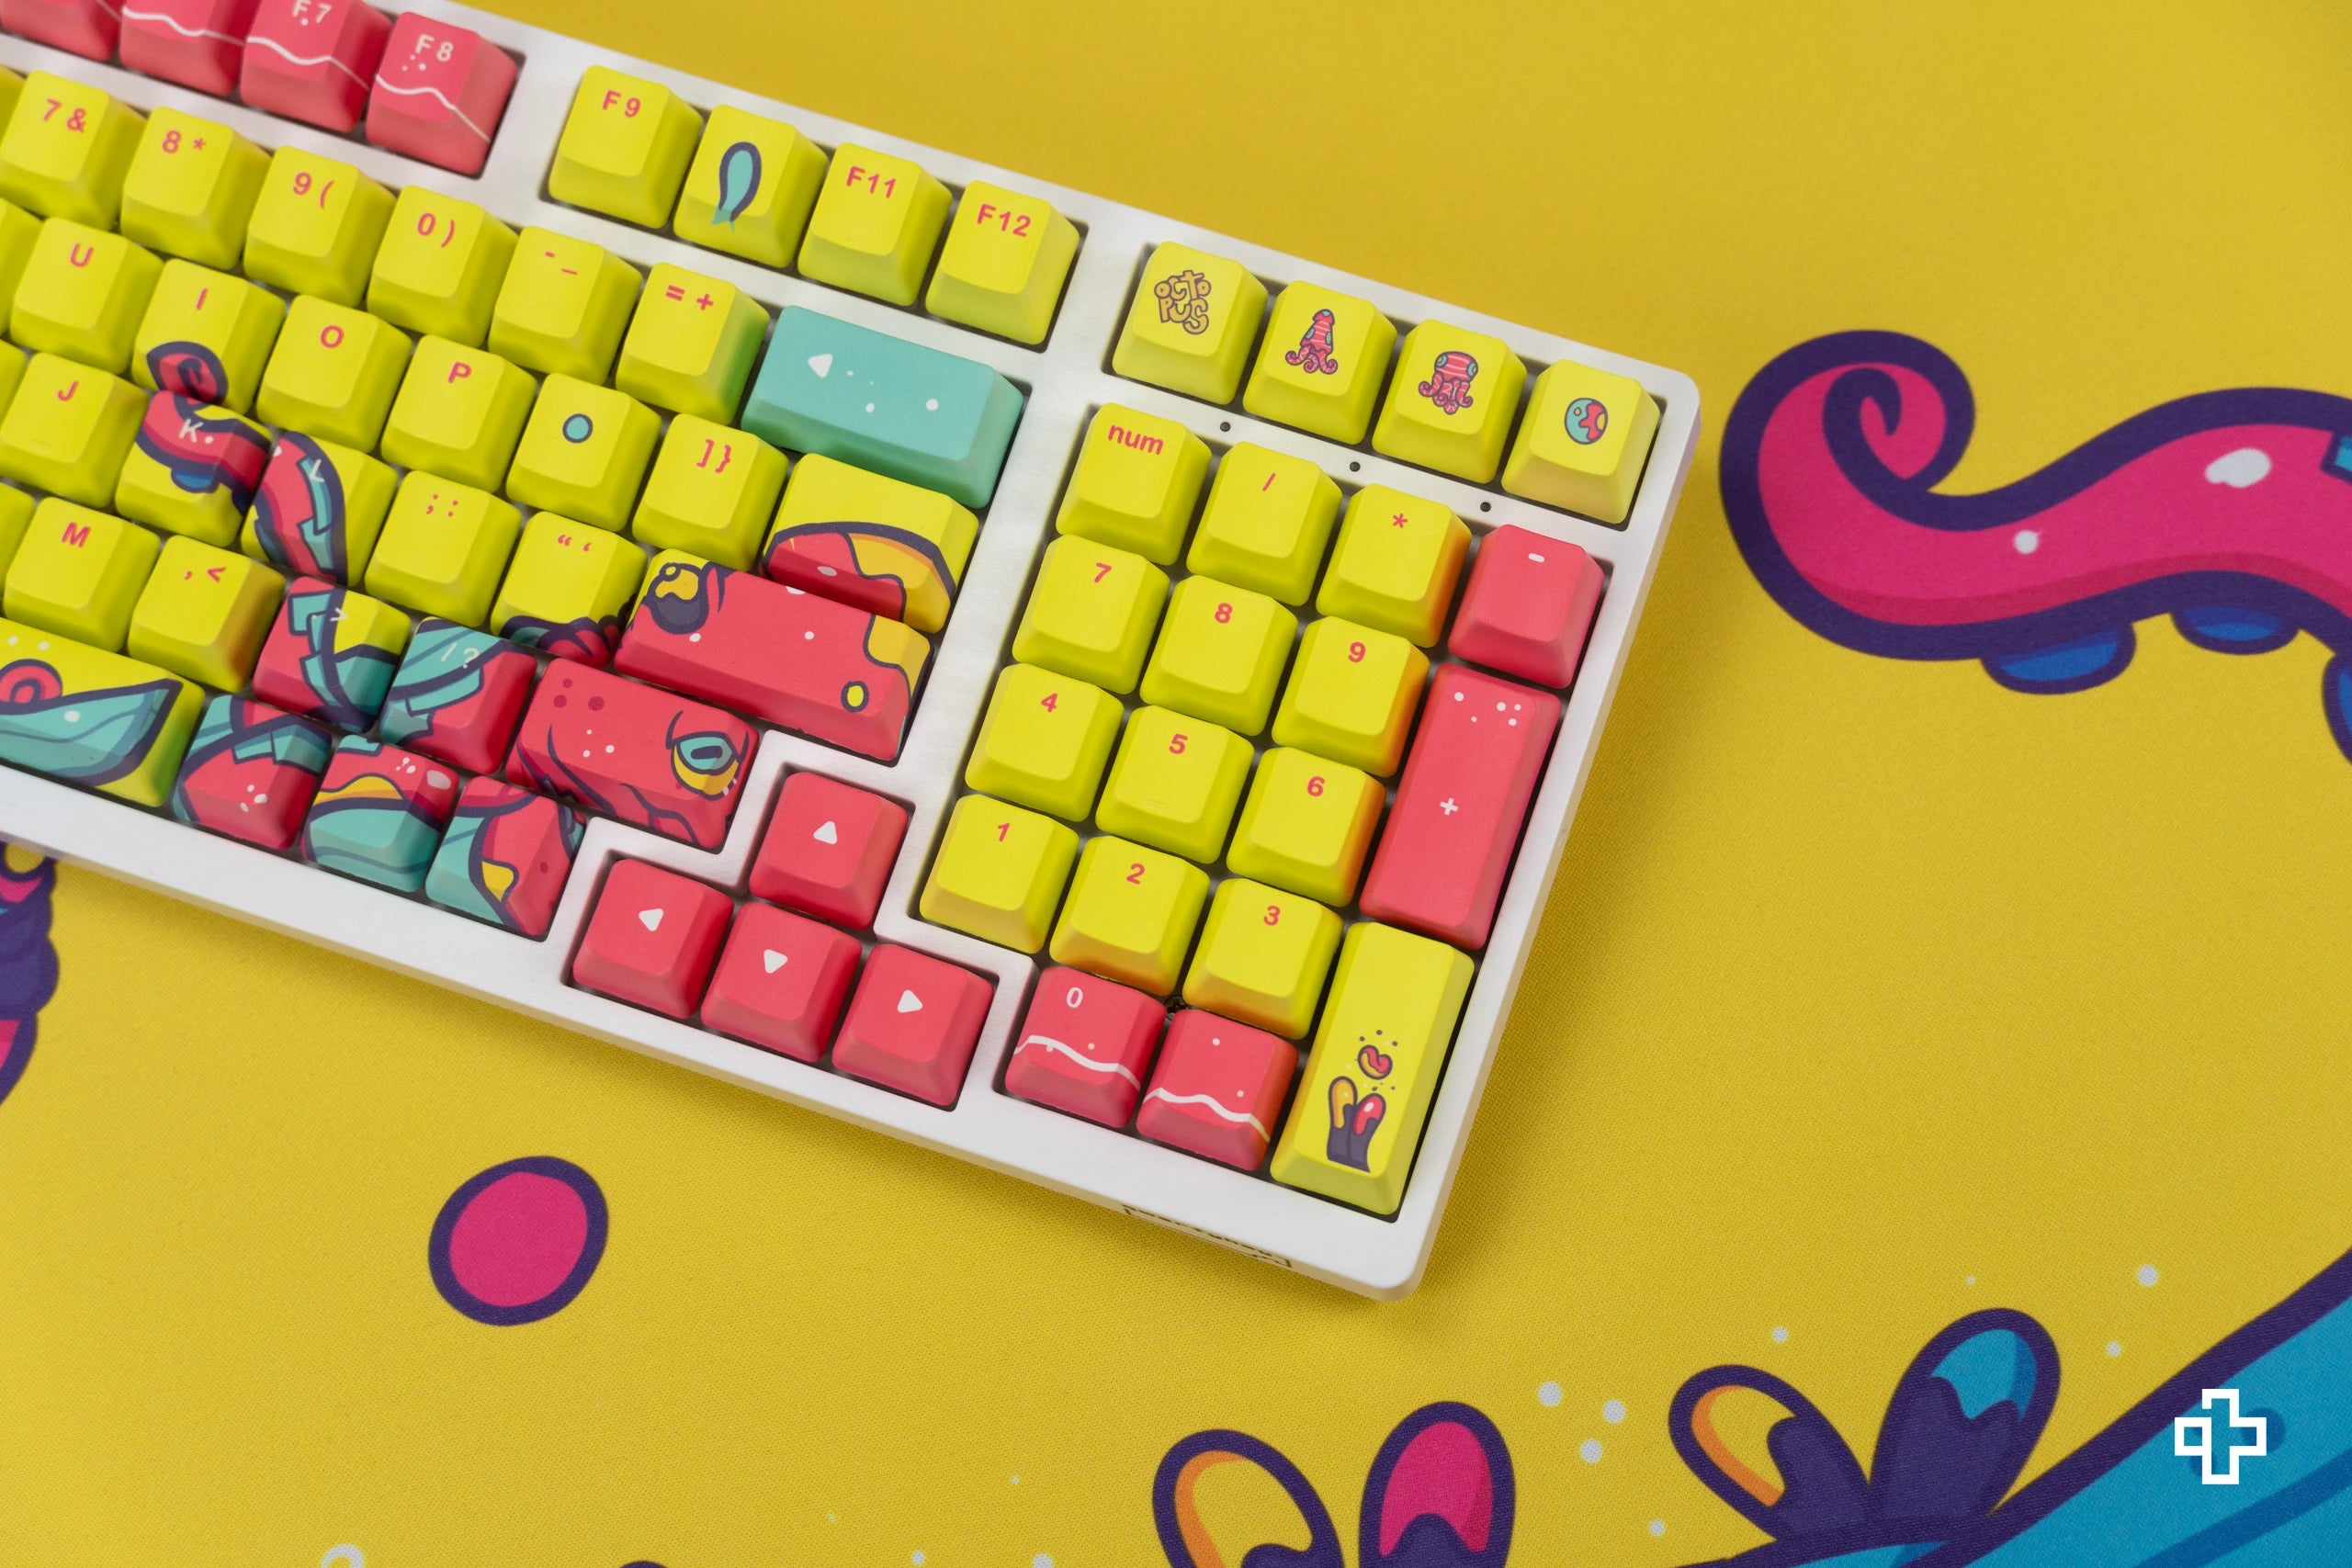 Imposta gusto QwertyKey Octopus Yellow Profil OEM Materiale PBT